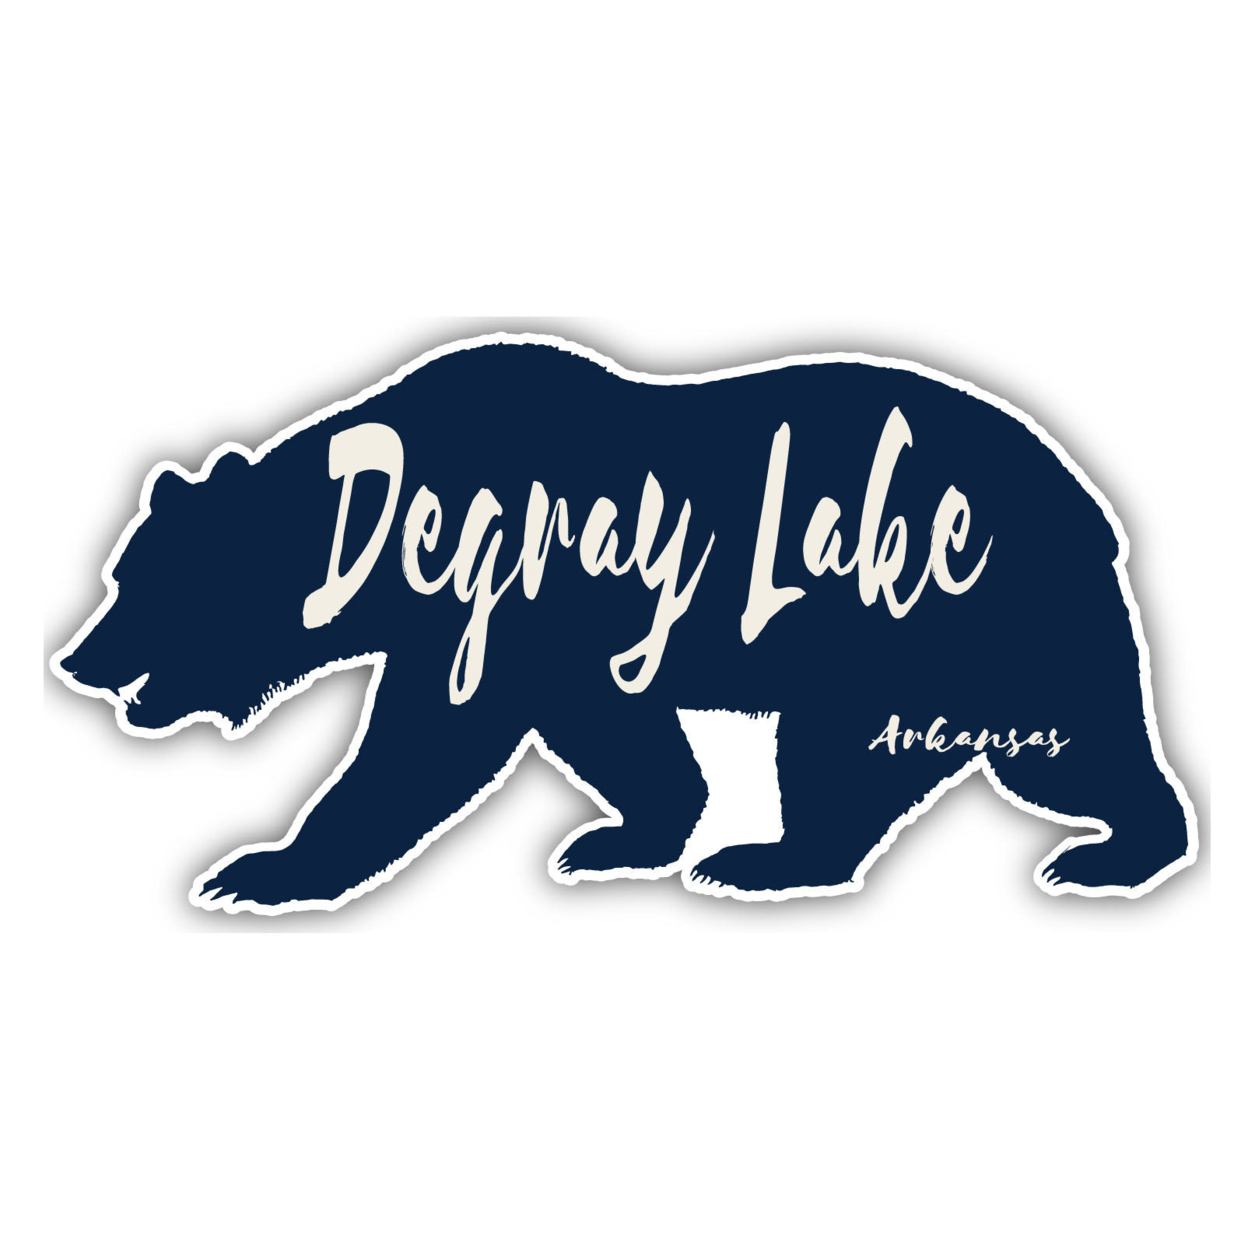 DeGray Lake Arkansas Souvenir Decorative Stickers (Choose Theme And Size) - 4-Pack, 10-Inch, Tent